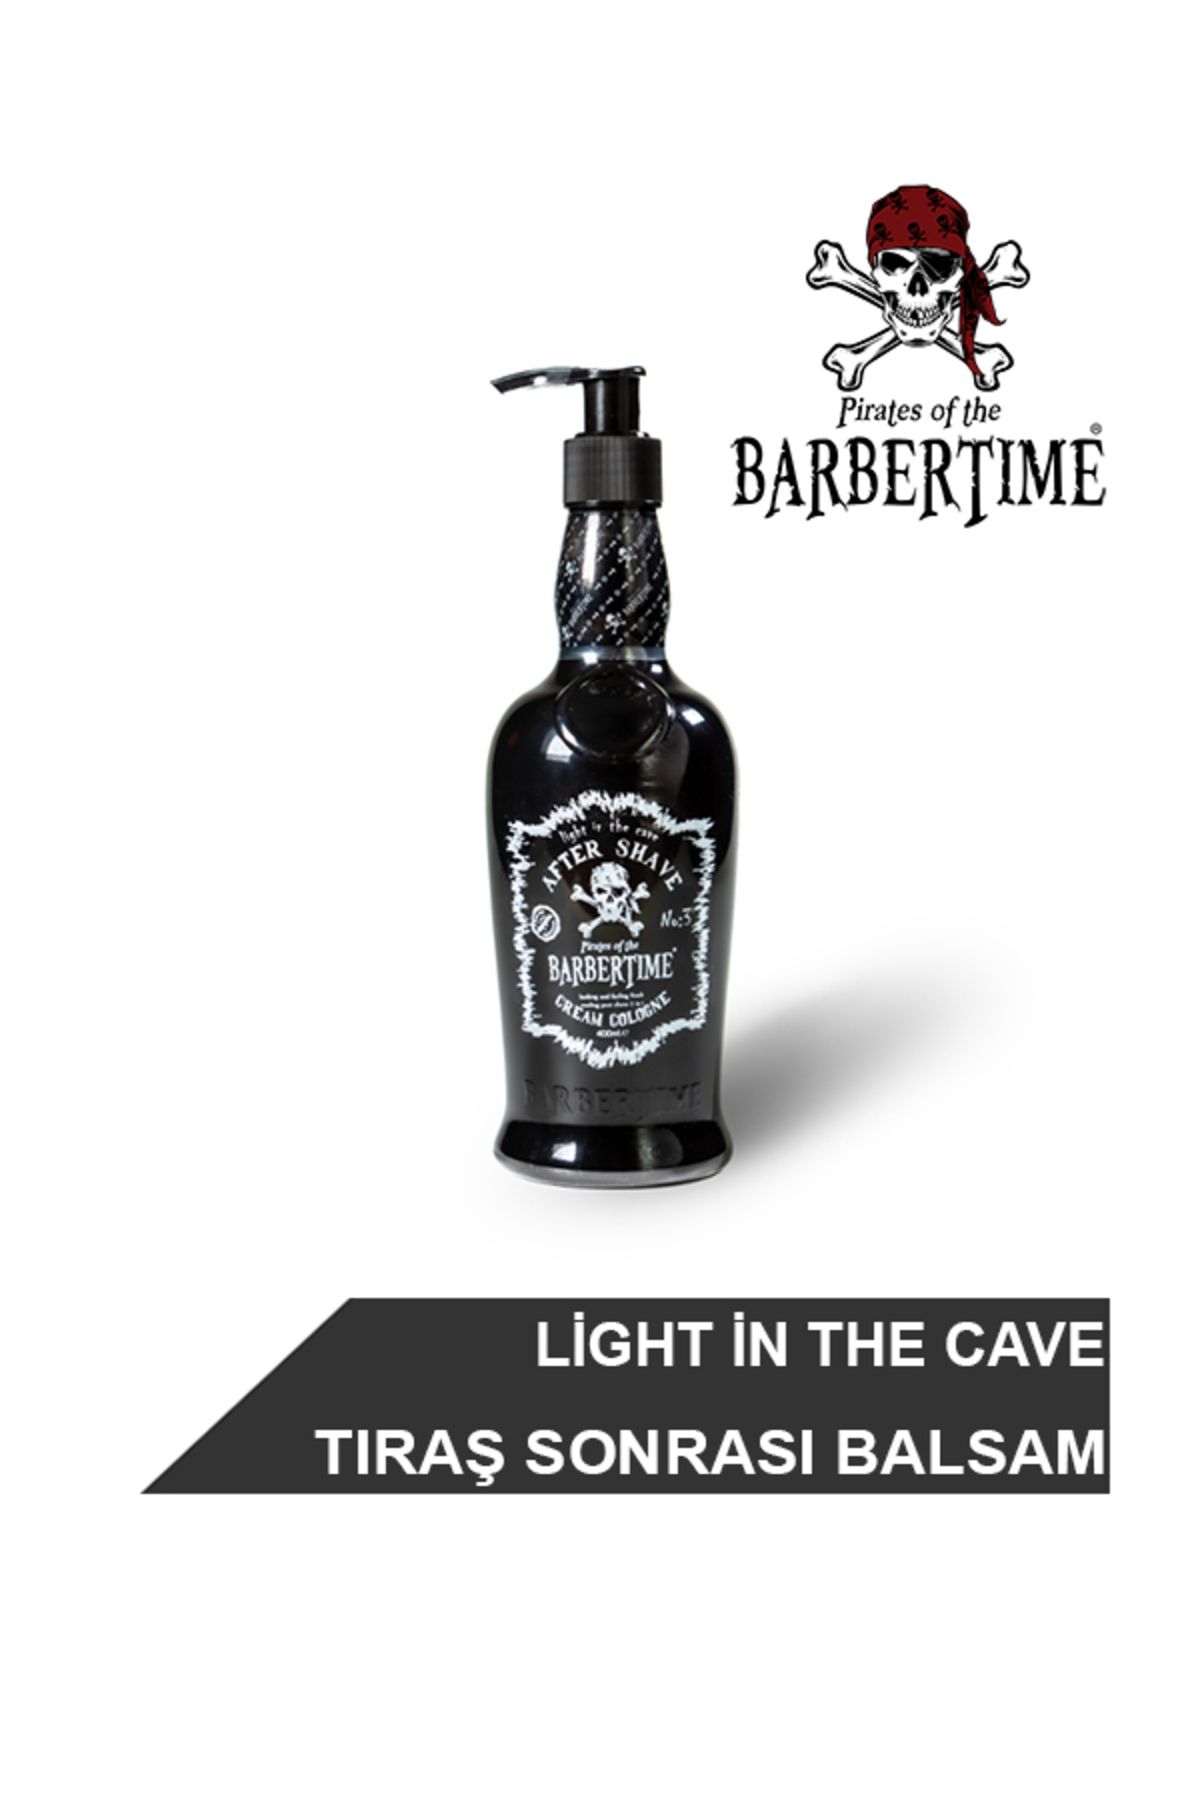 Barbertime After Shave Cream Cologne Light In The Cave Balsam 400ml